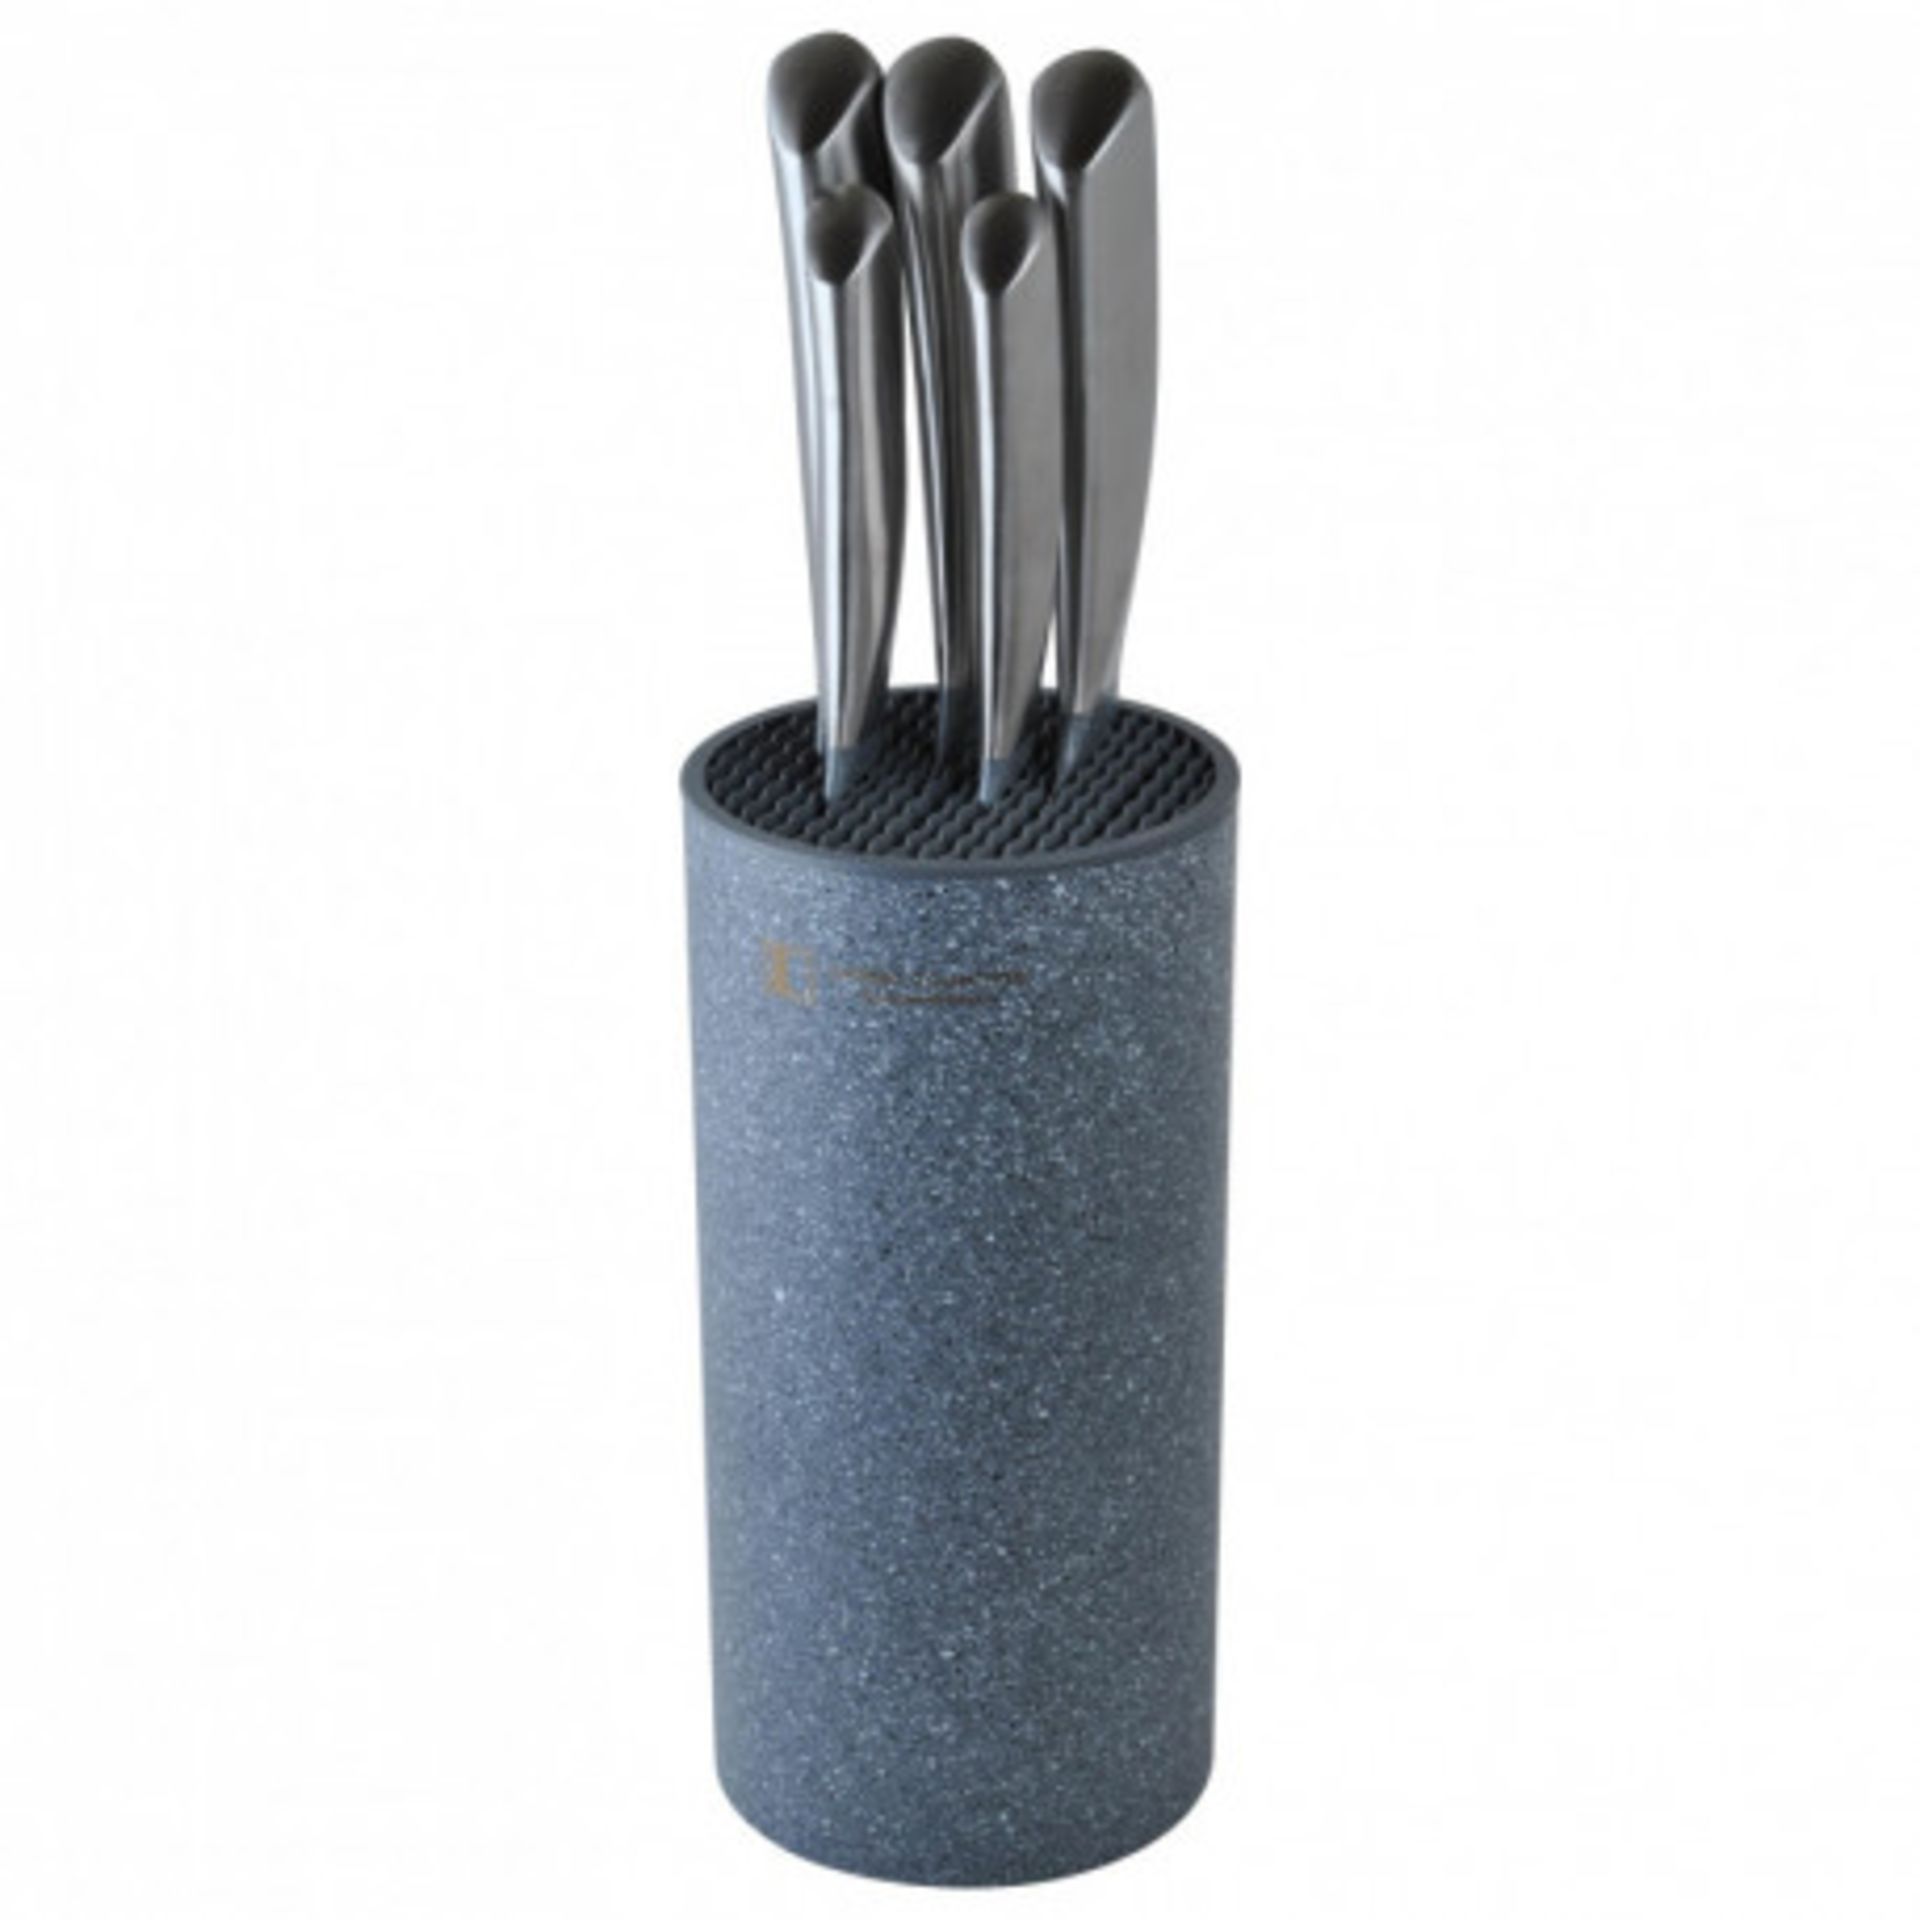 V Brand New Stainless Steel with Marble coating Knife Set In grey marble stlye Holder Includes 6" - Image 2 of 4